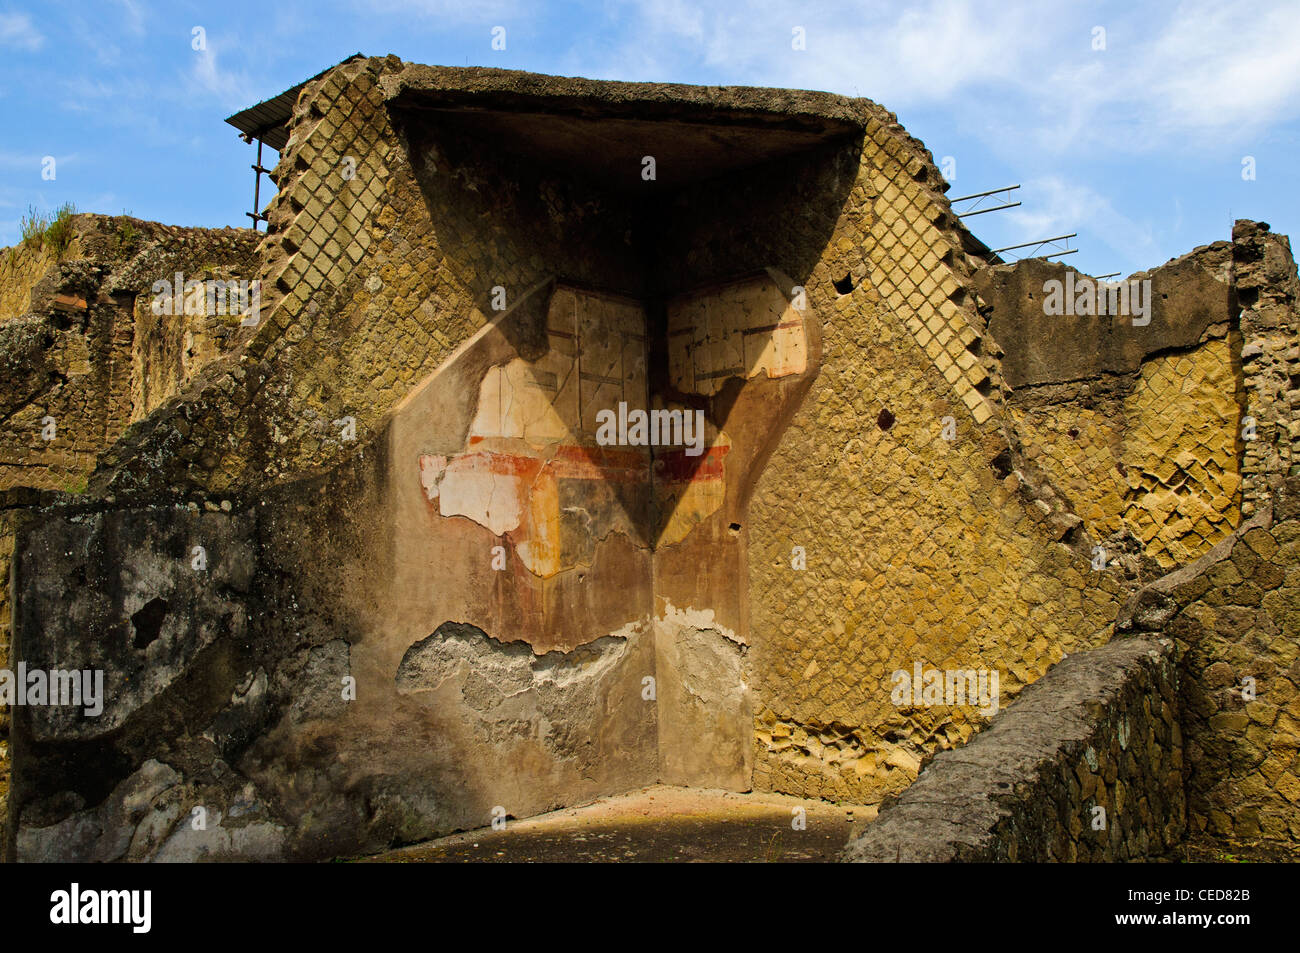 The ruins of a building still showing remnants of plaster decorated in the fourth style with colourful architectural motifs Stock Photo